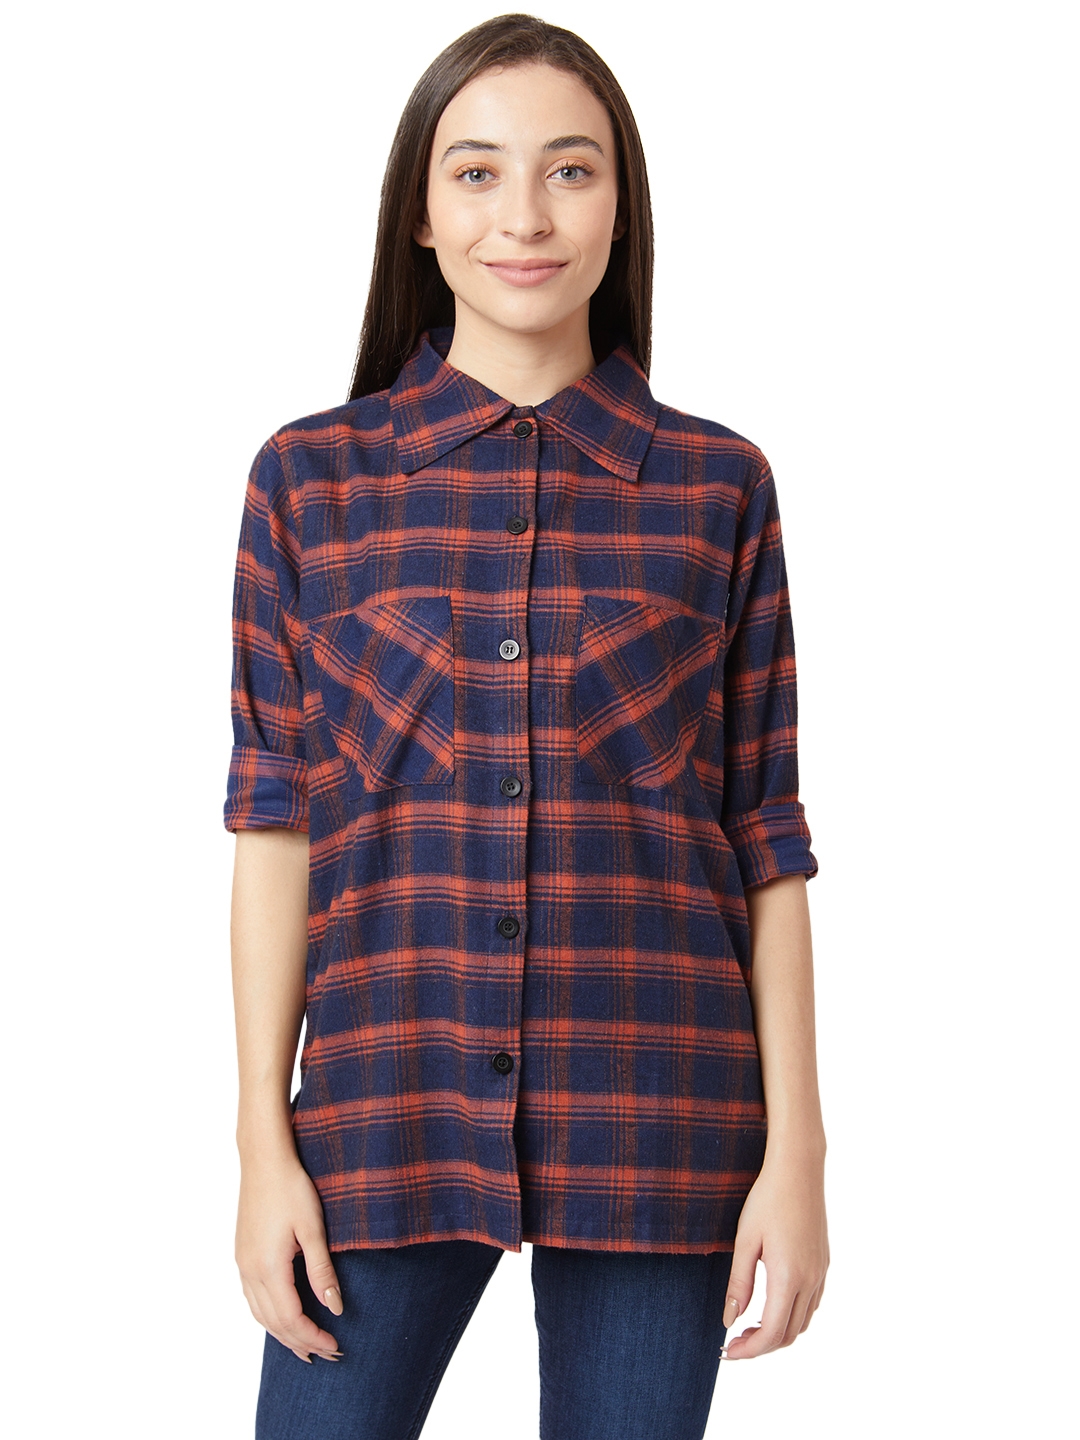 Smarty Pants | Smarty Pants women's cotton wool rusty maroon color checkered long line shirt.